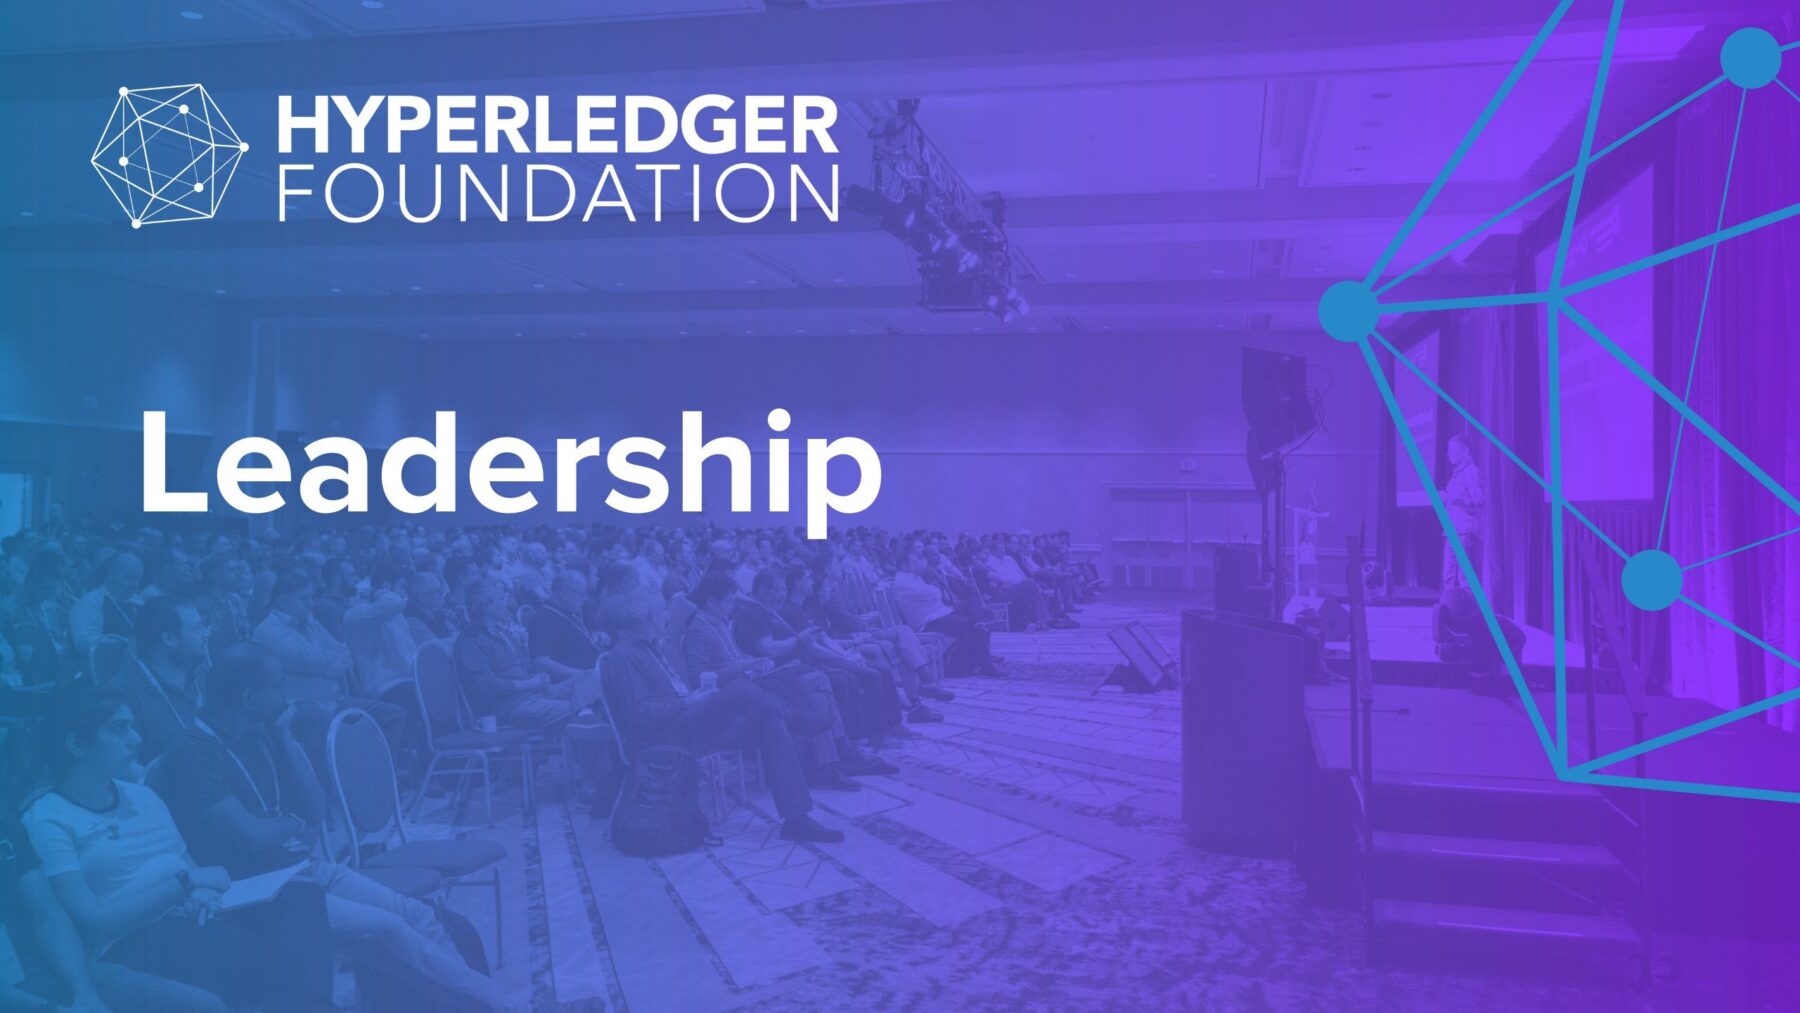 Welcome to the new Hyperledger Foundation Marketing Committee leaders